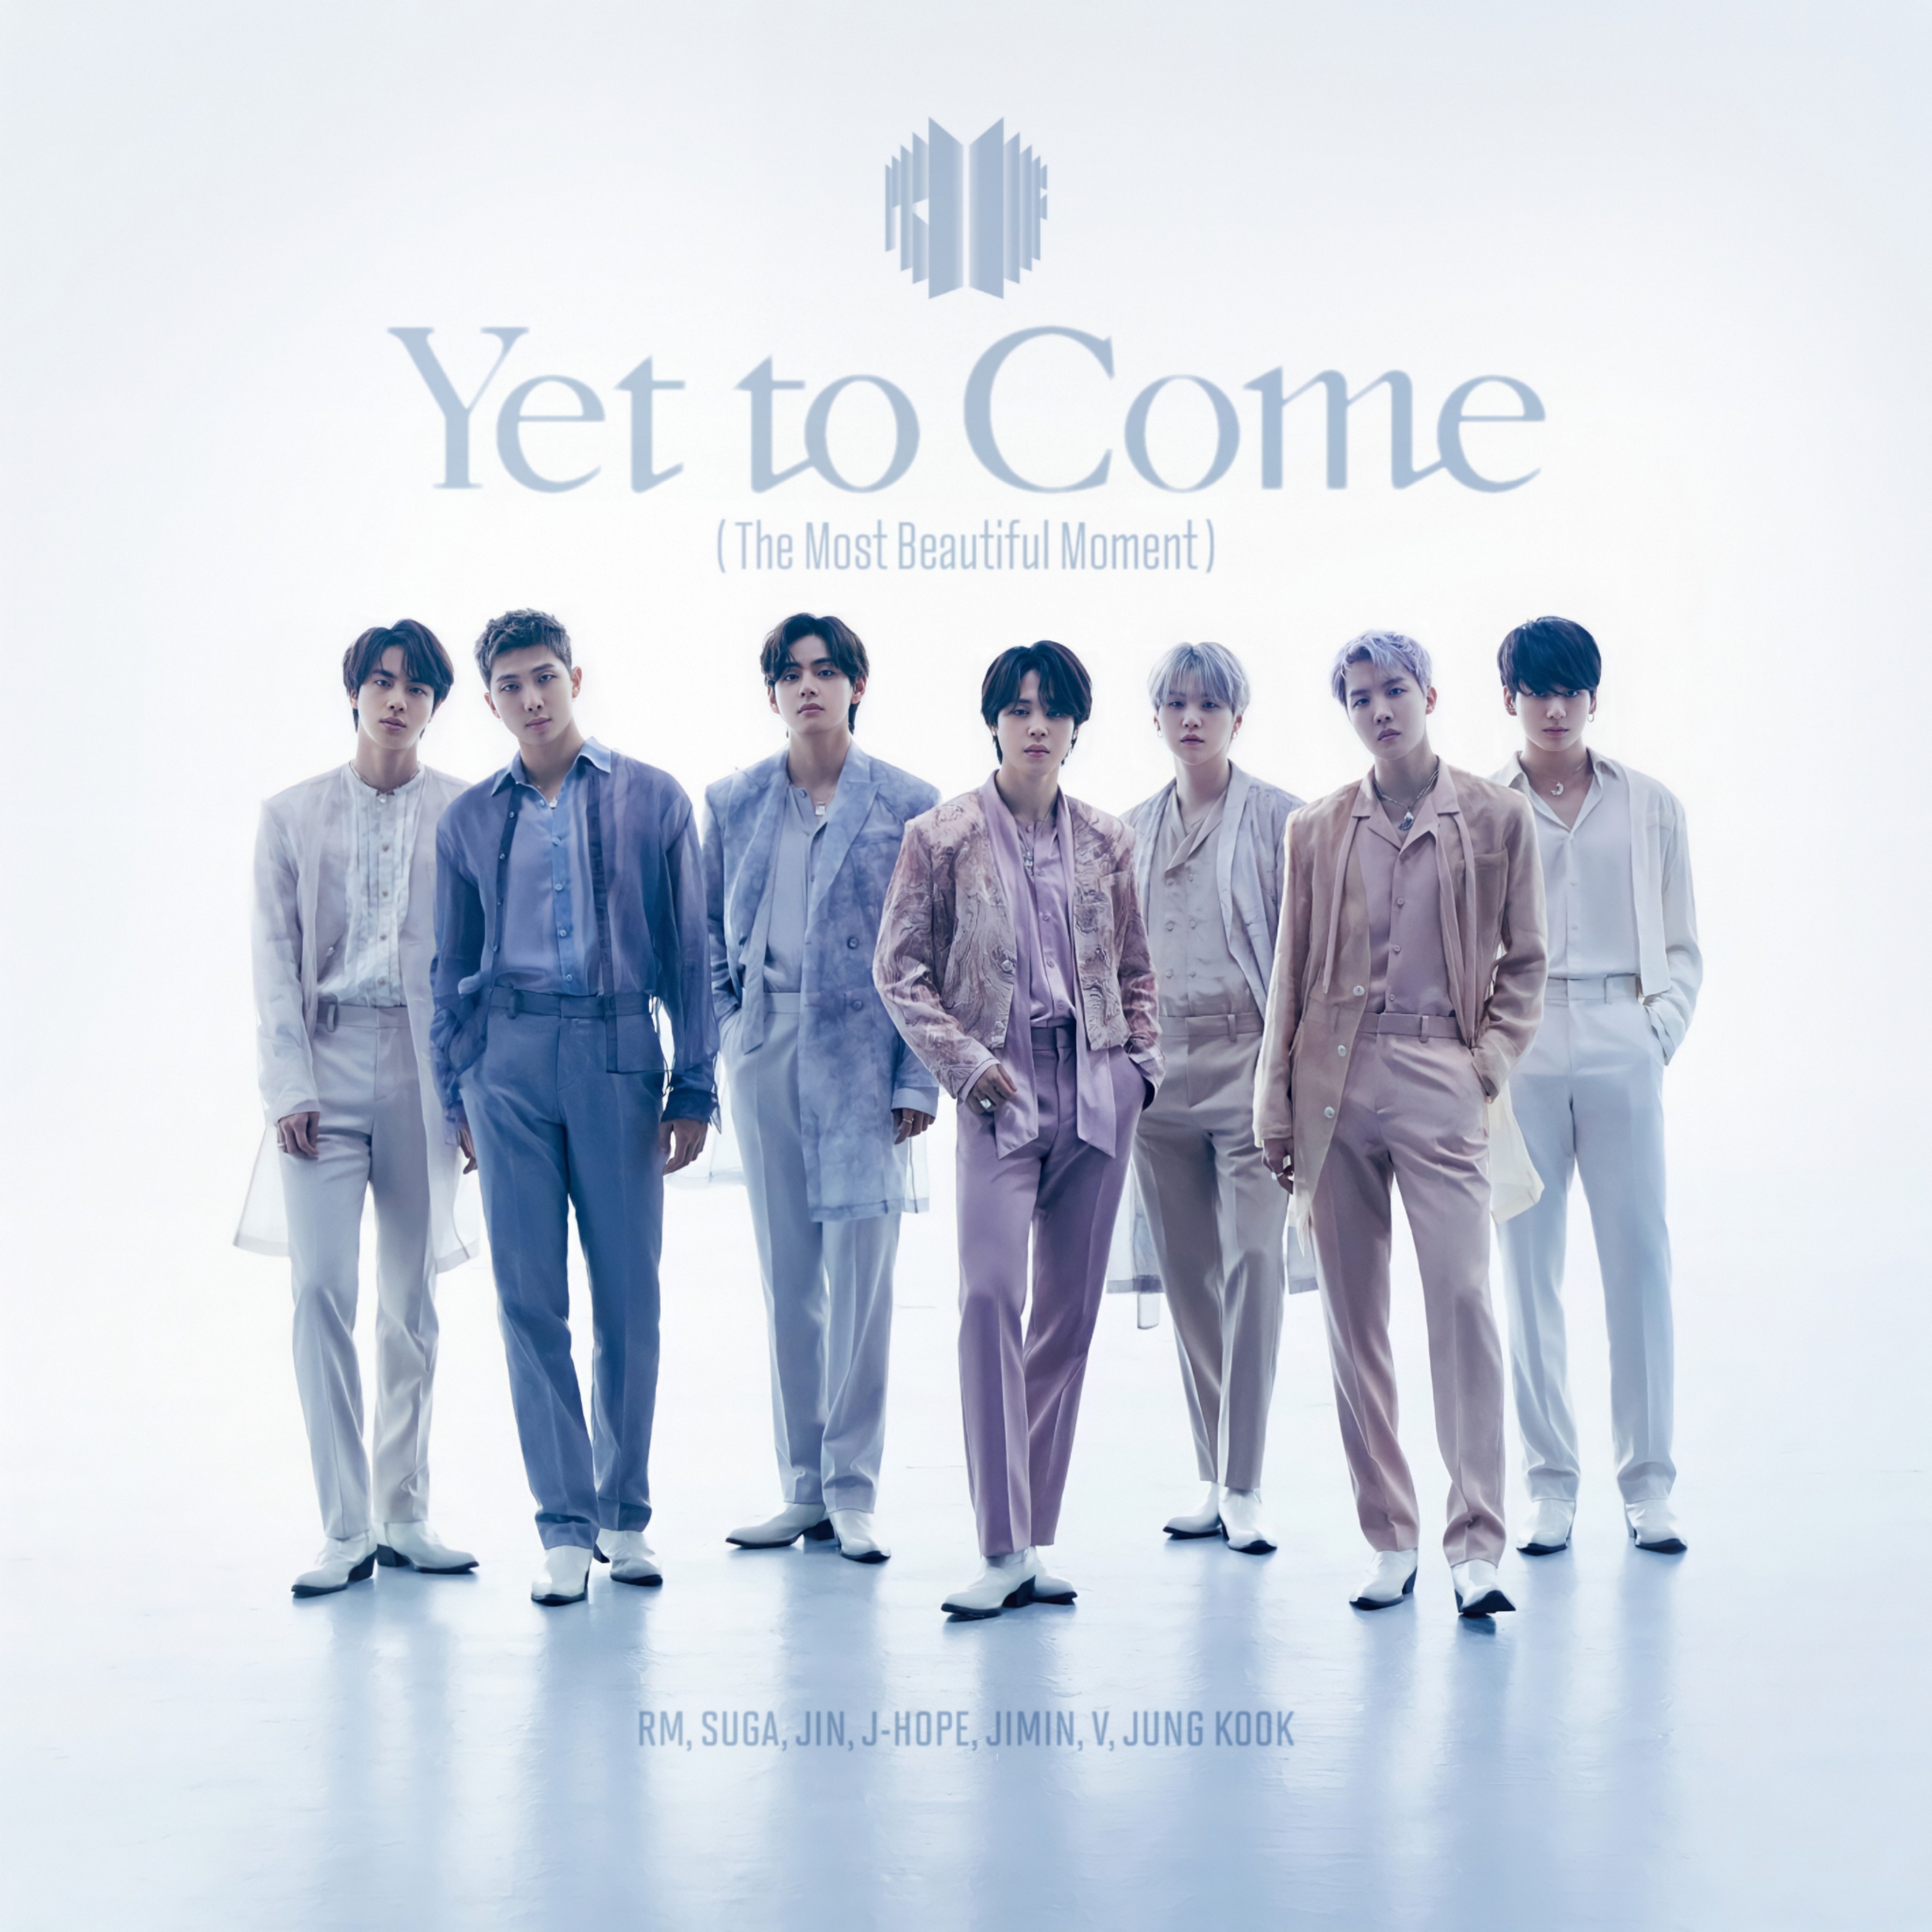 BTS - YET TO COME (ALBUM COVER) by Kyliemaine on DeviantArt